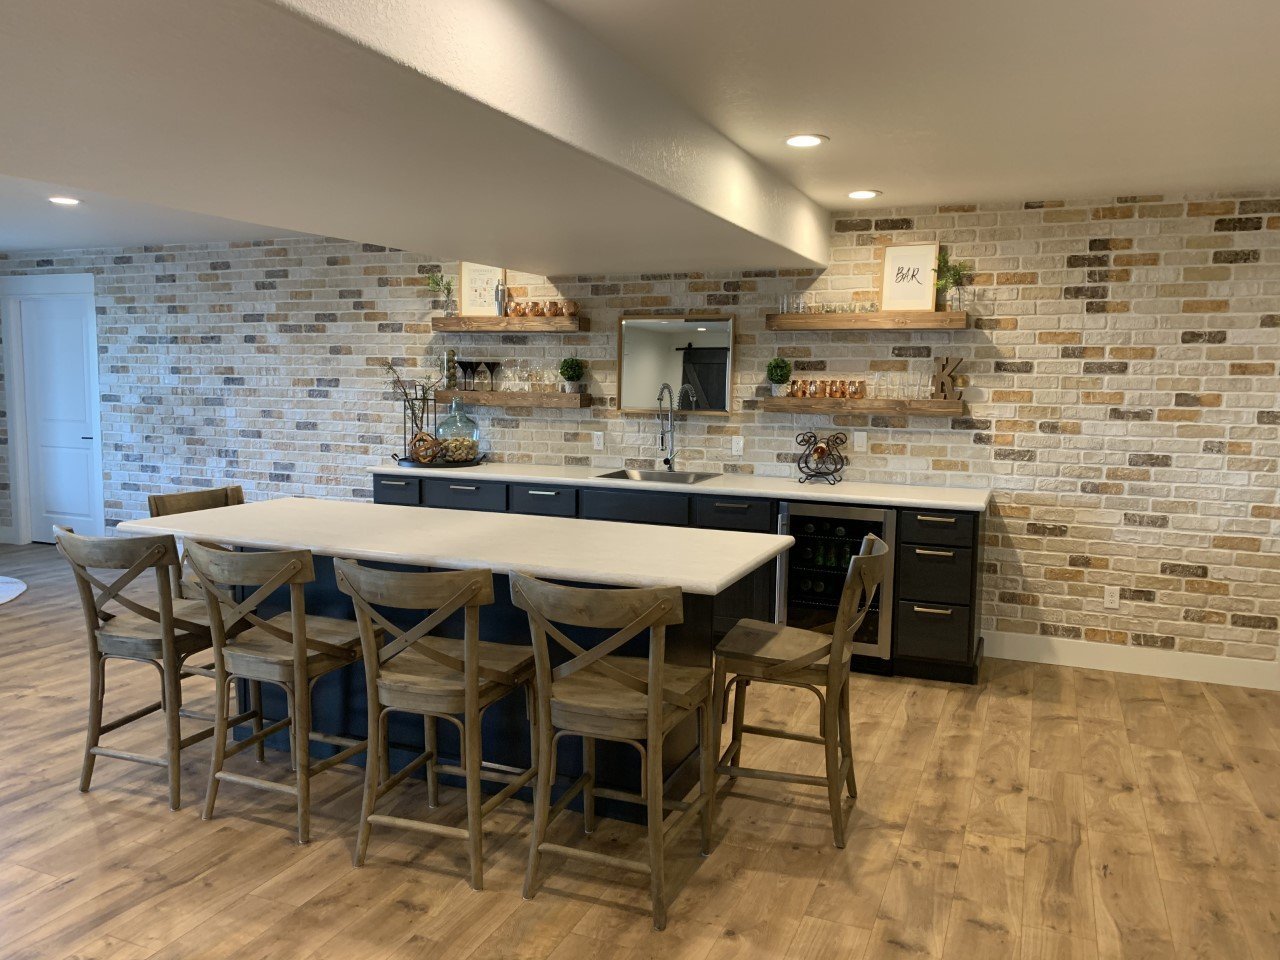 Pacific Creme Used Brick Dining Room